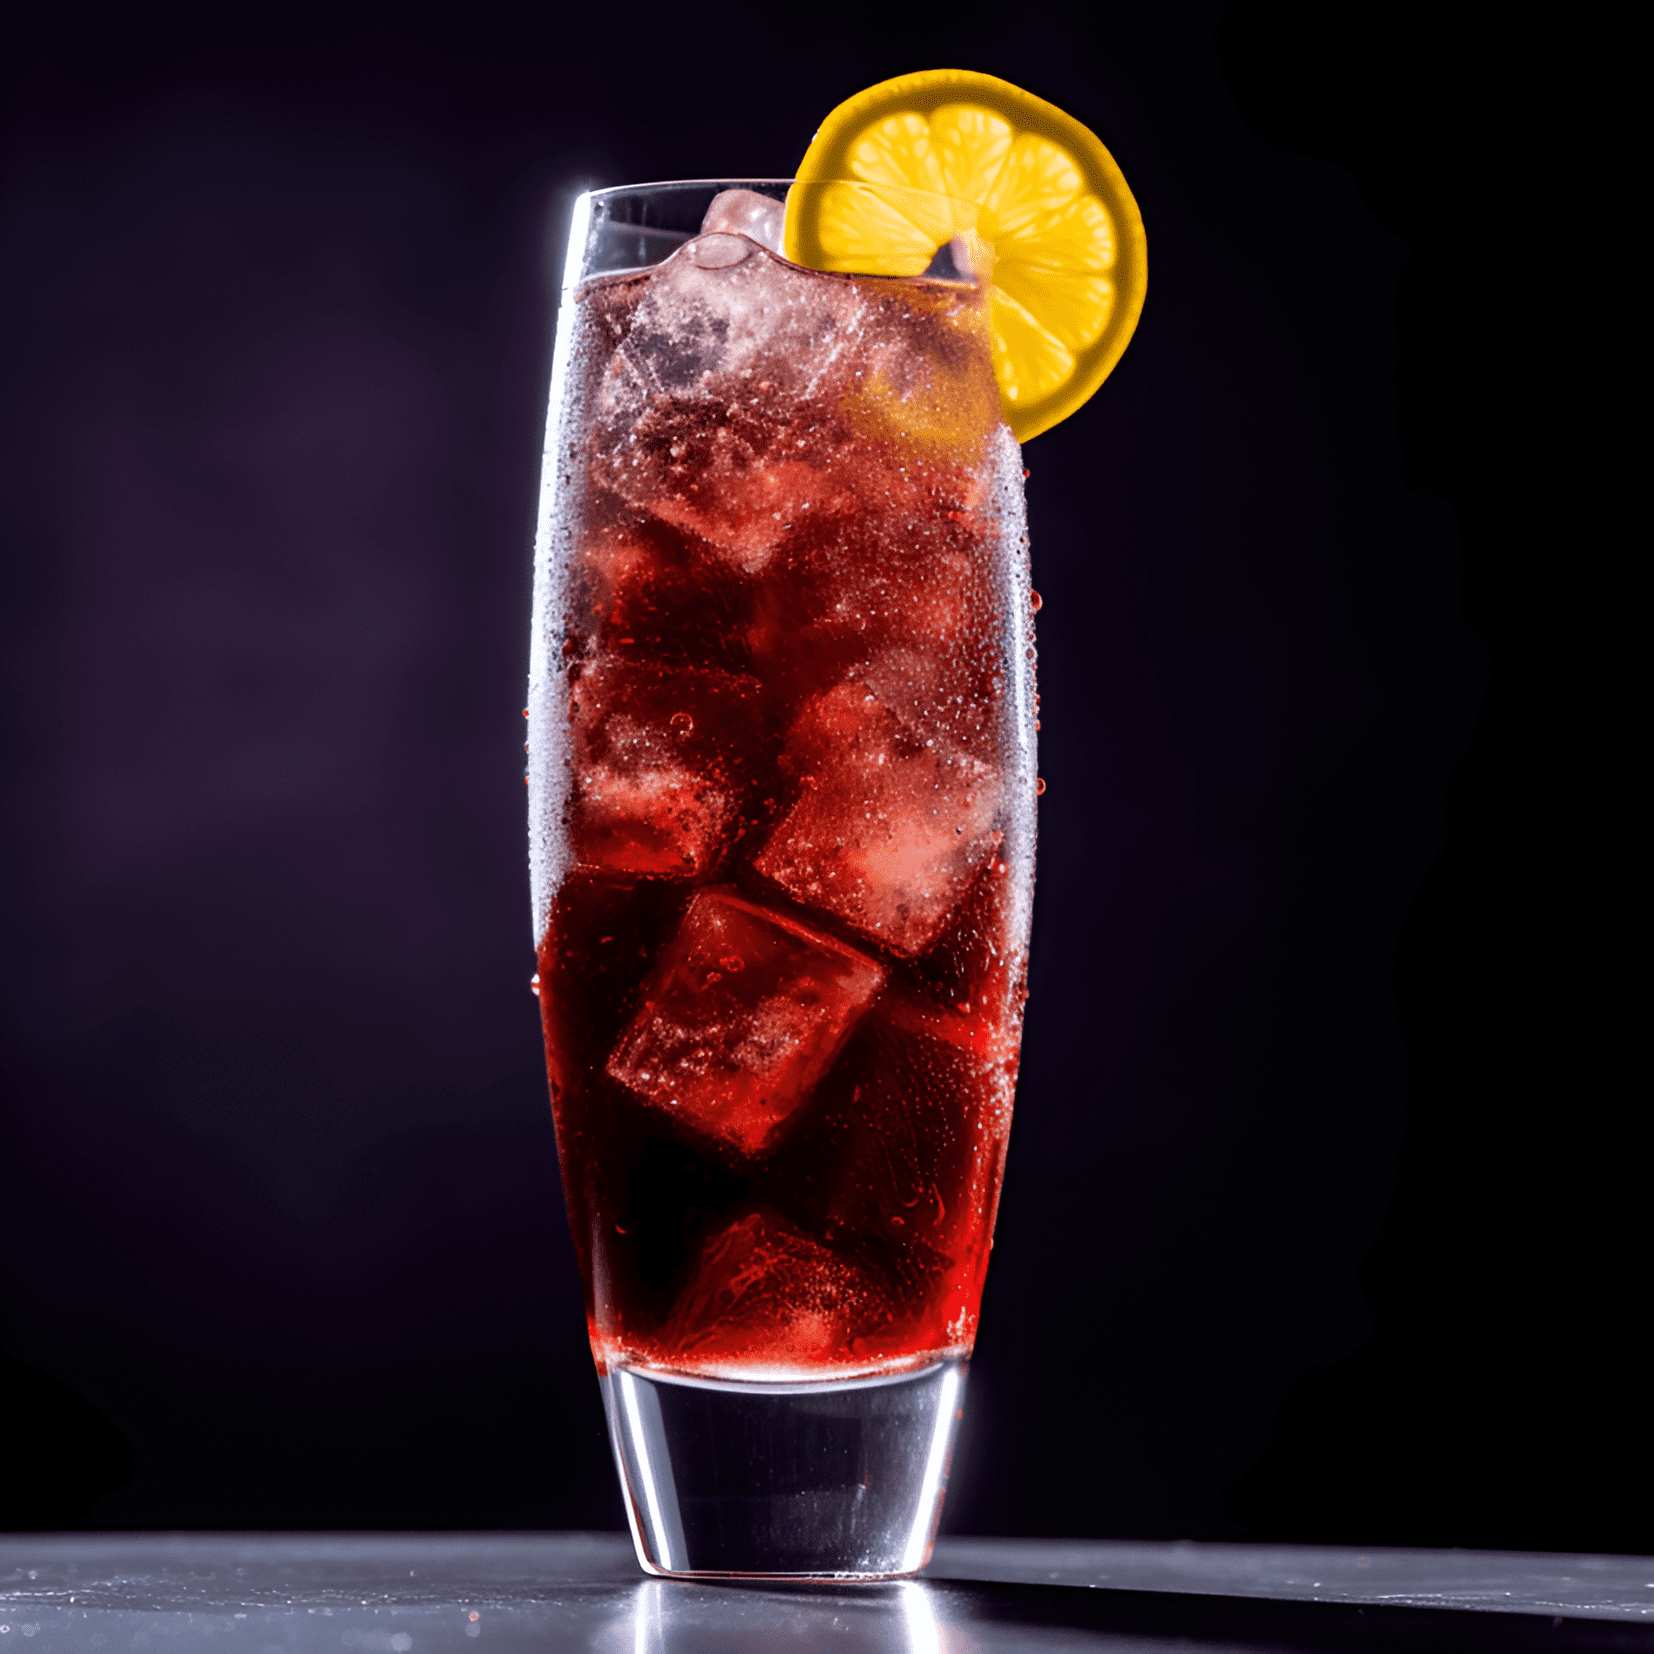 The Calimocho cocktail has a unique taste that is both sweet and slightly tangy. The red wine provides a fruity and robust flavor, while the cola adds a bubbly sweetness and a hint of caramel. The combination creates a well-balanced and easy-to-drink cocktail.